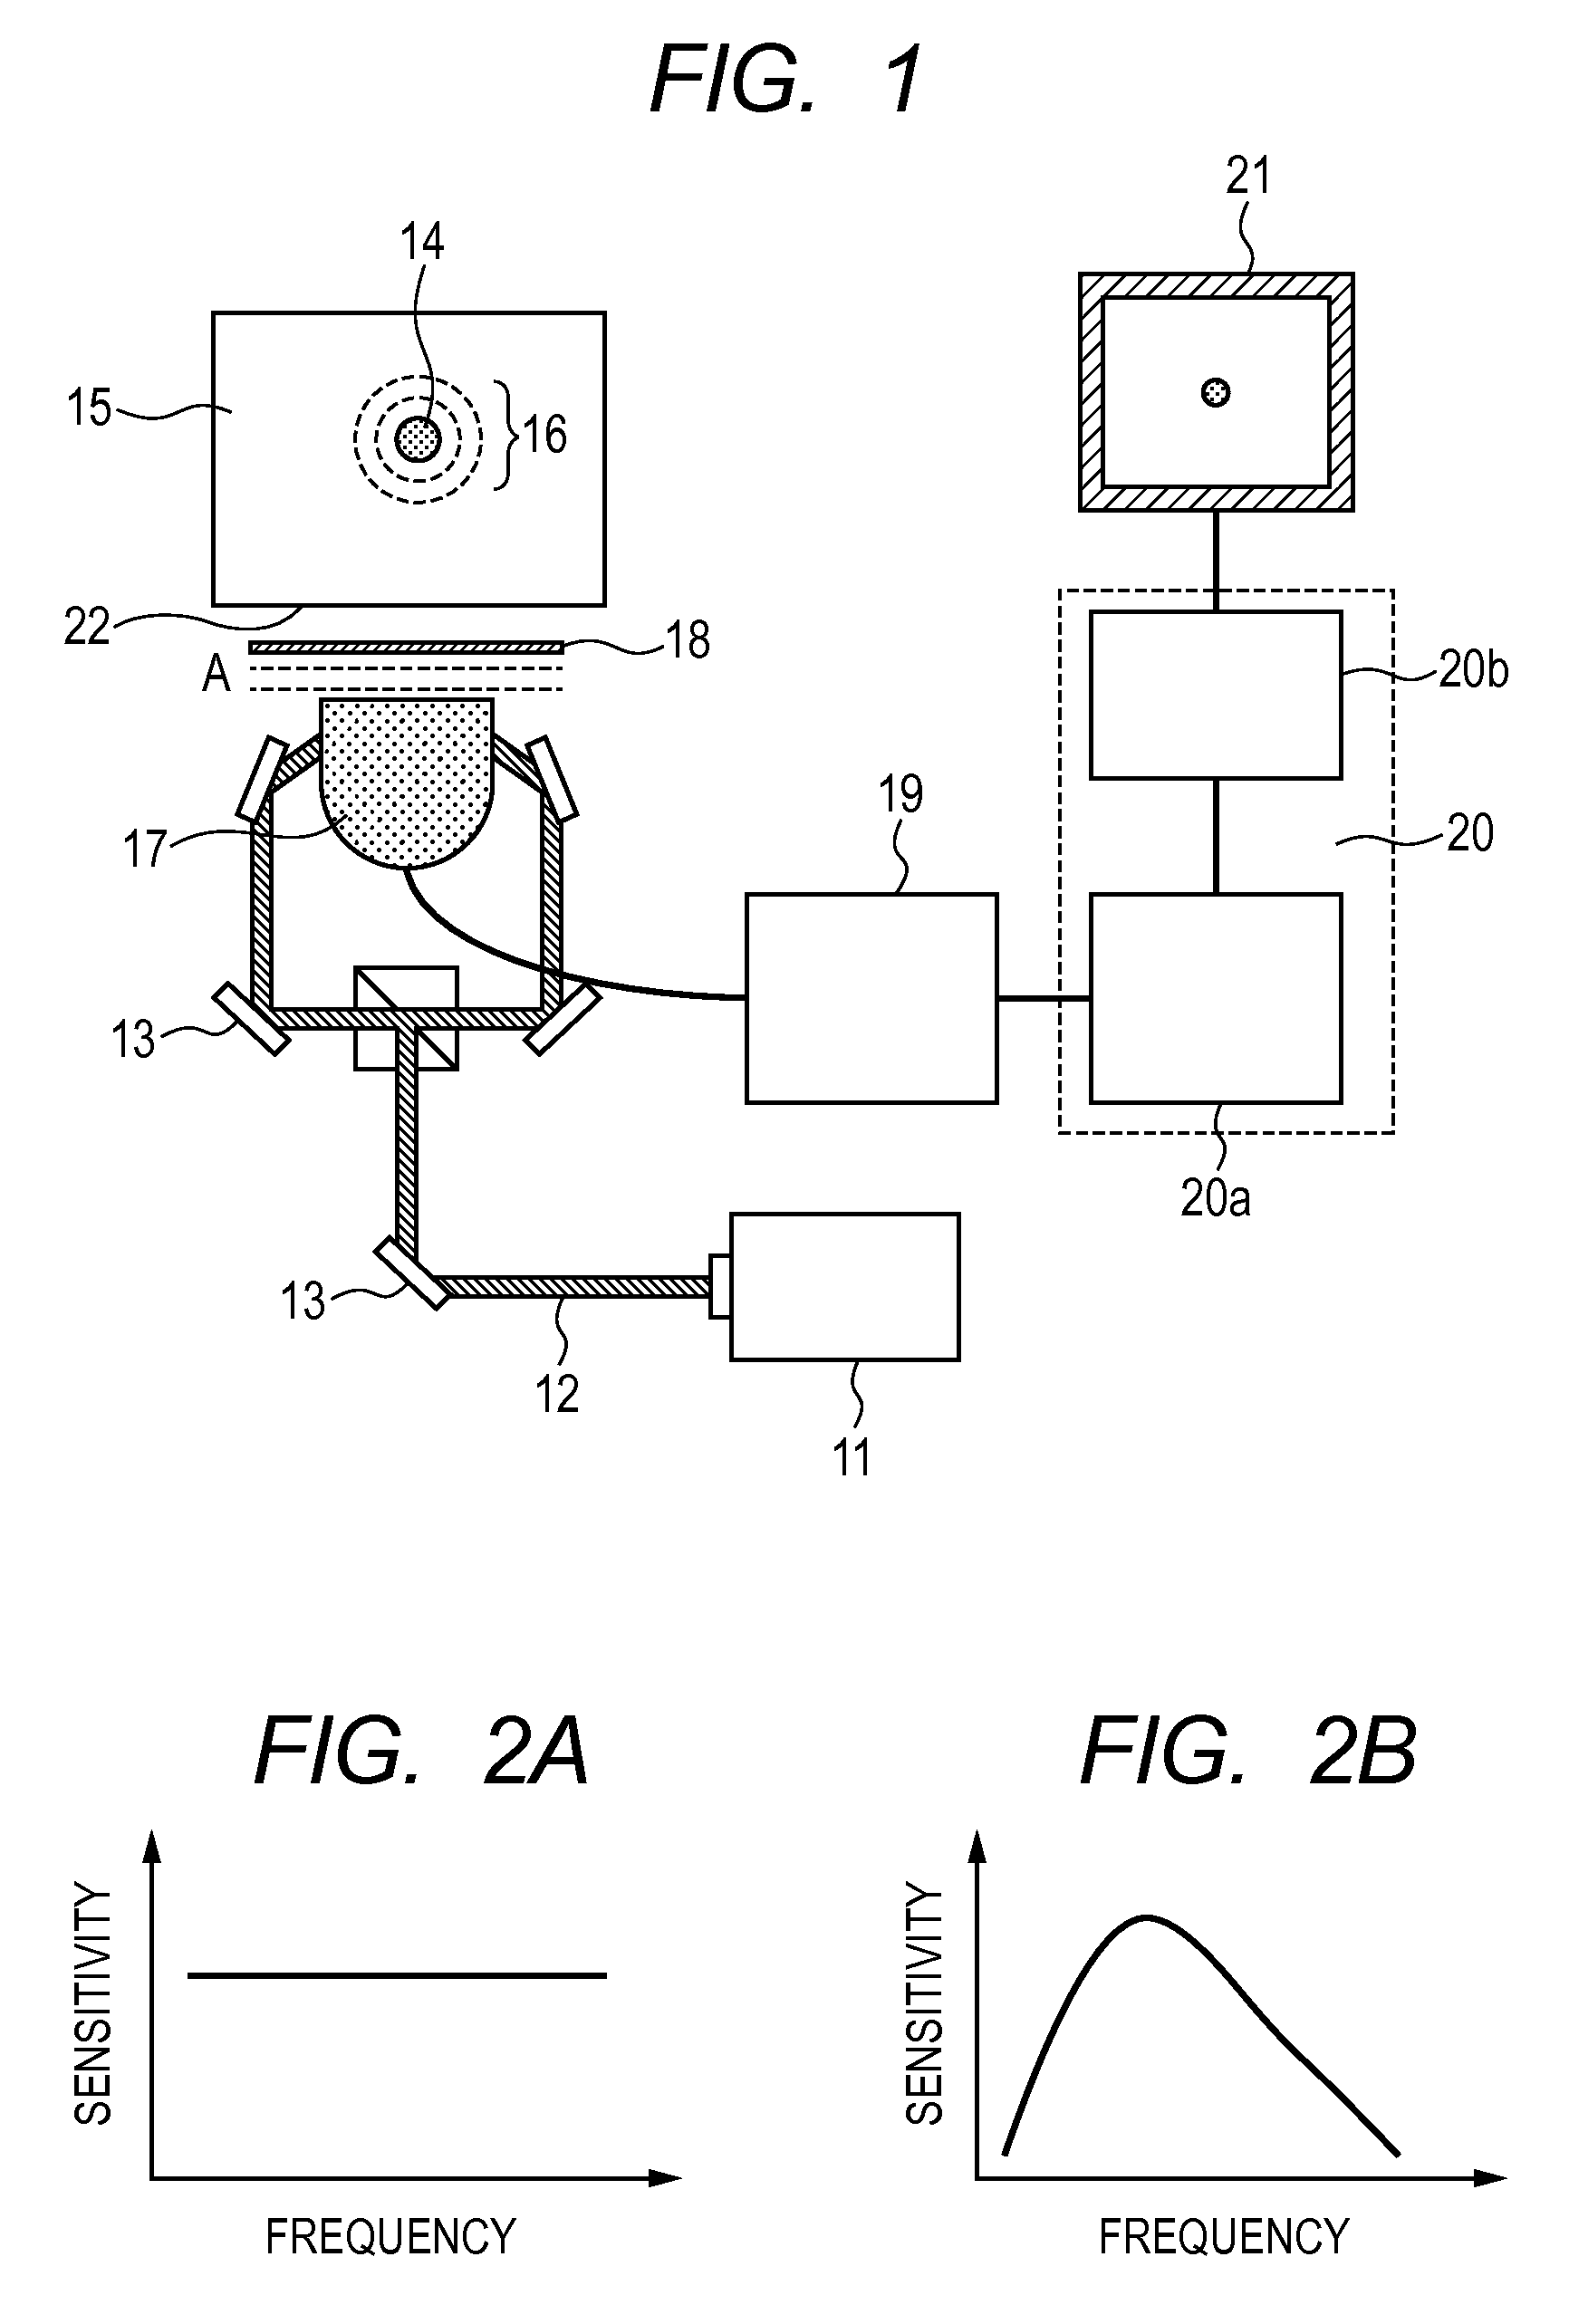 Subject information acquiring device and subject information acquiring method